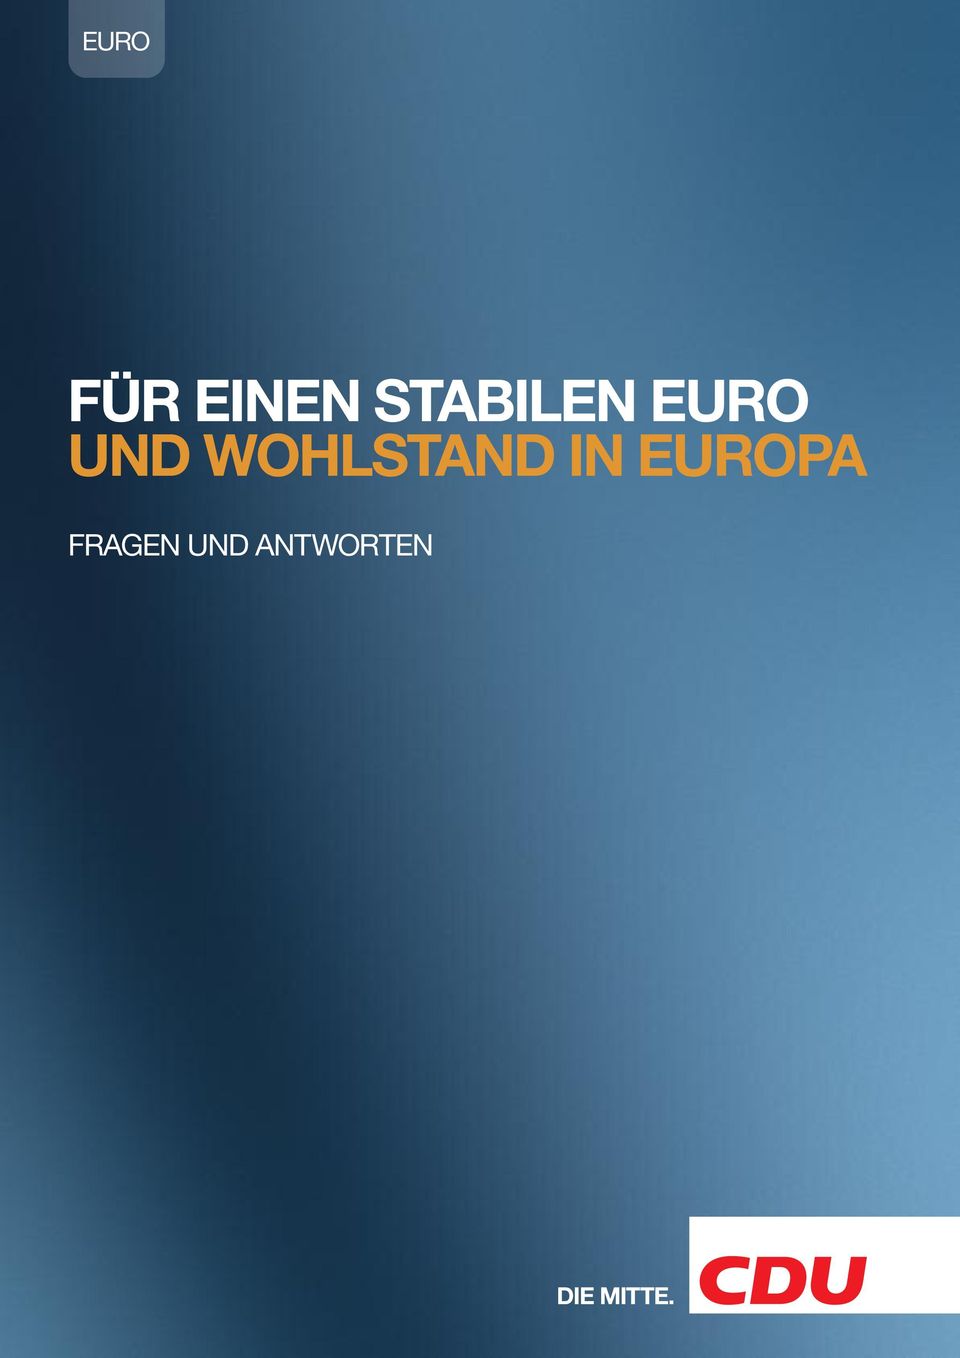 Wohlstand in europa